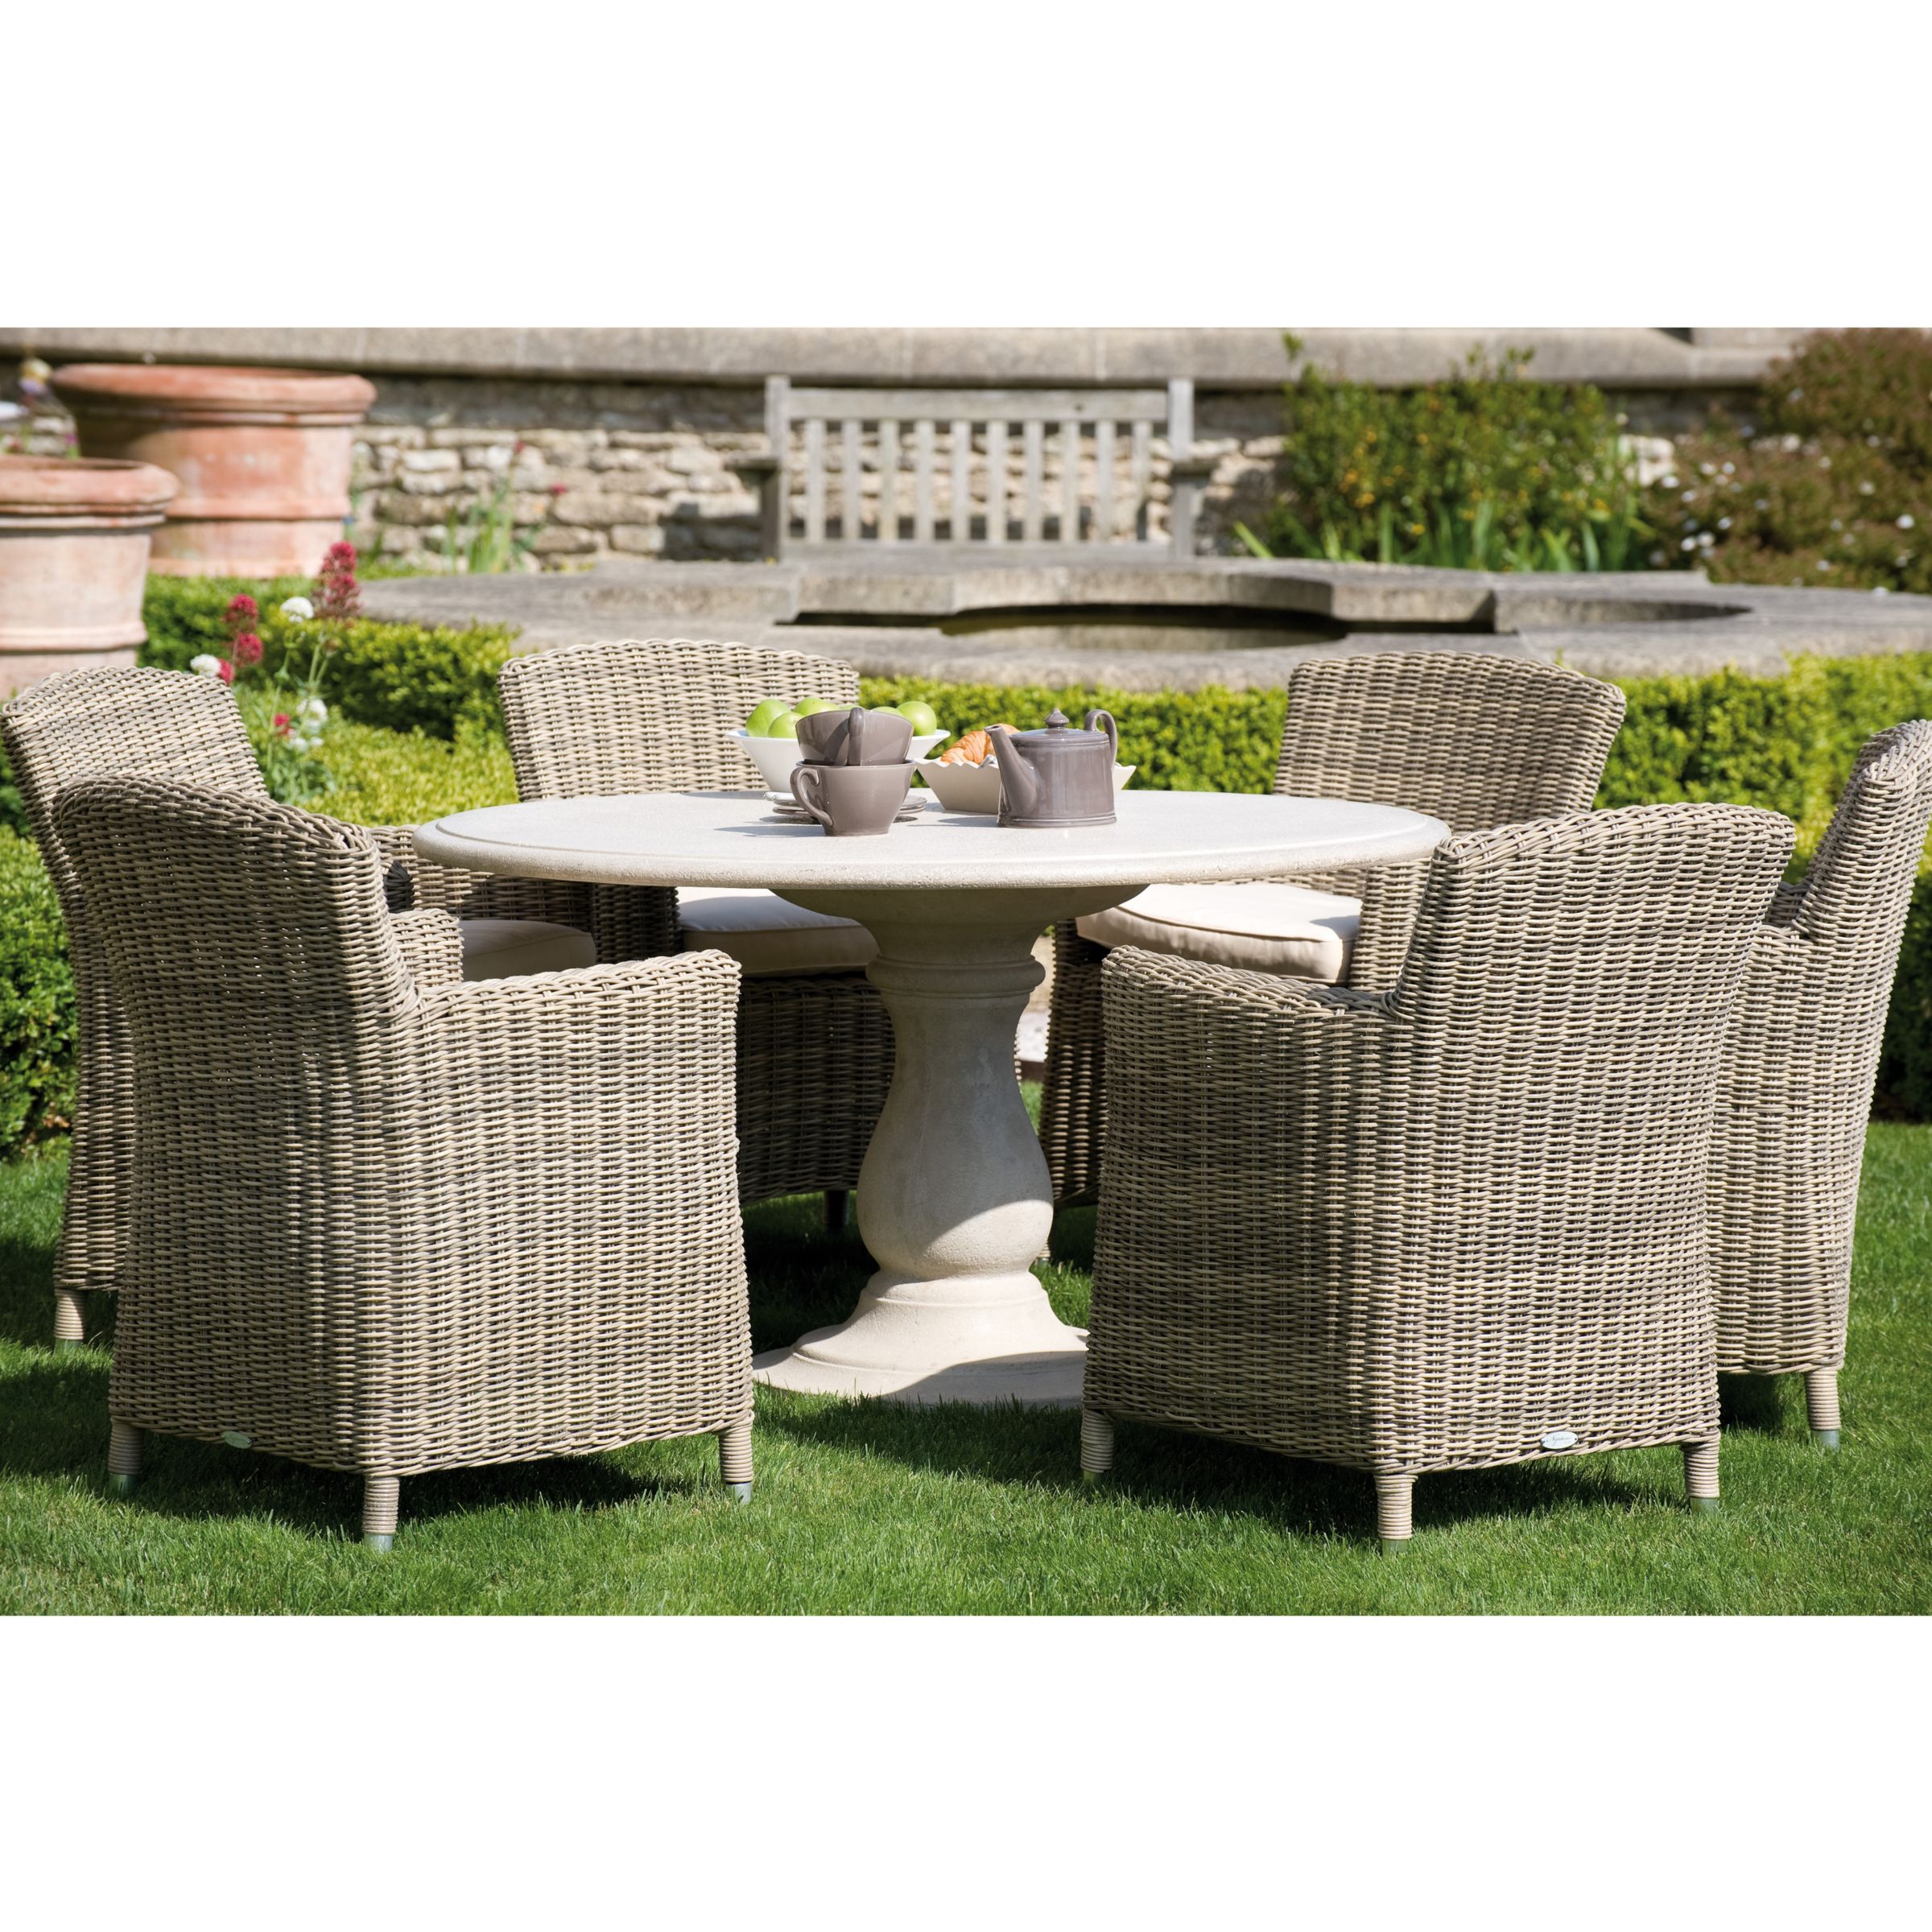 Neptune Portland Round 6 Seater Outdoor Dining Table, Synthetic Wicker